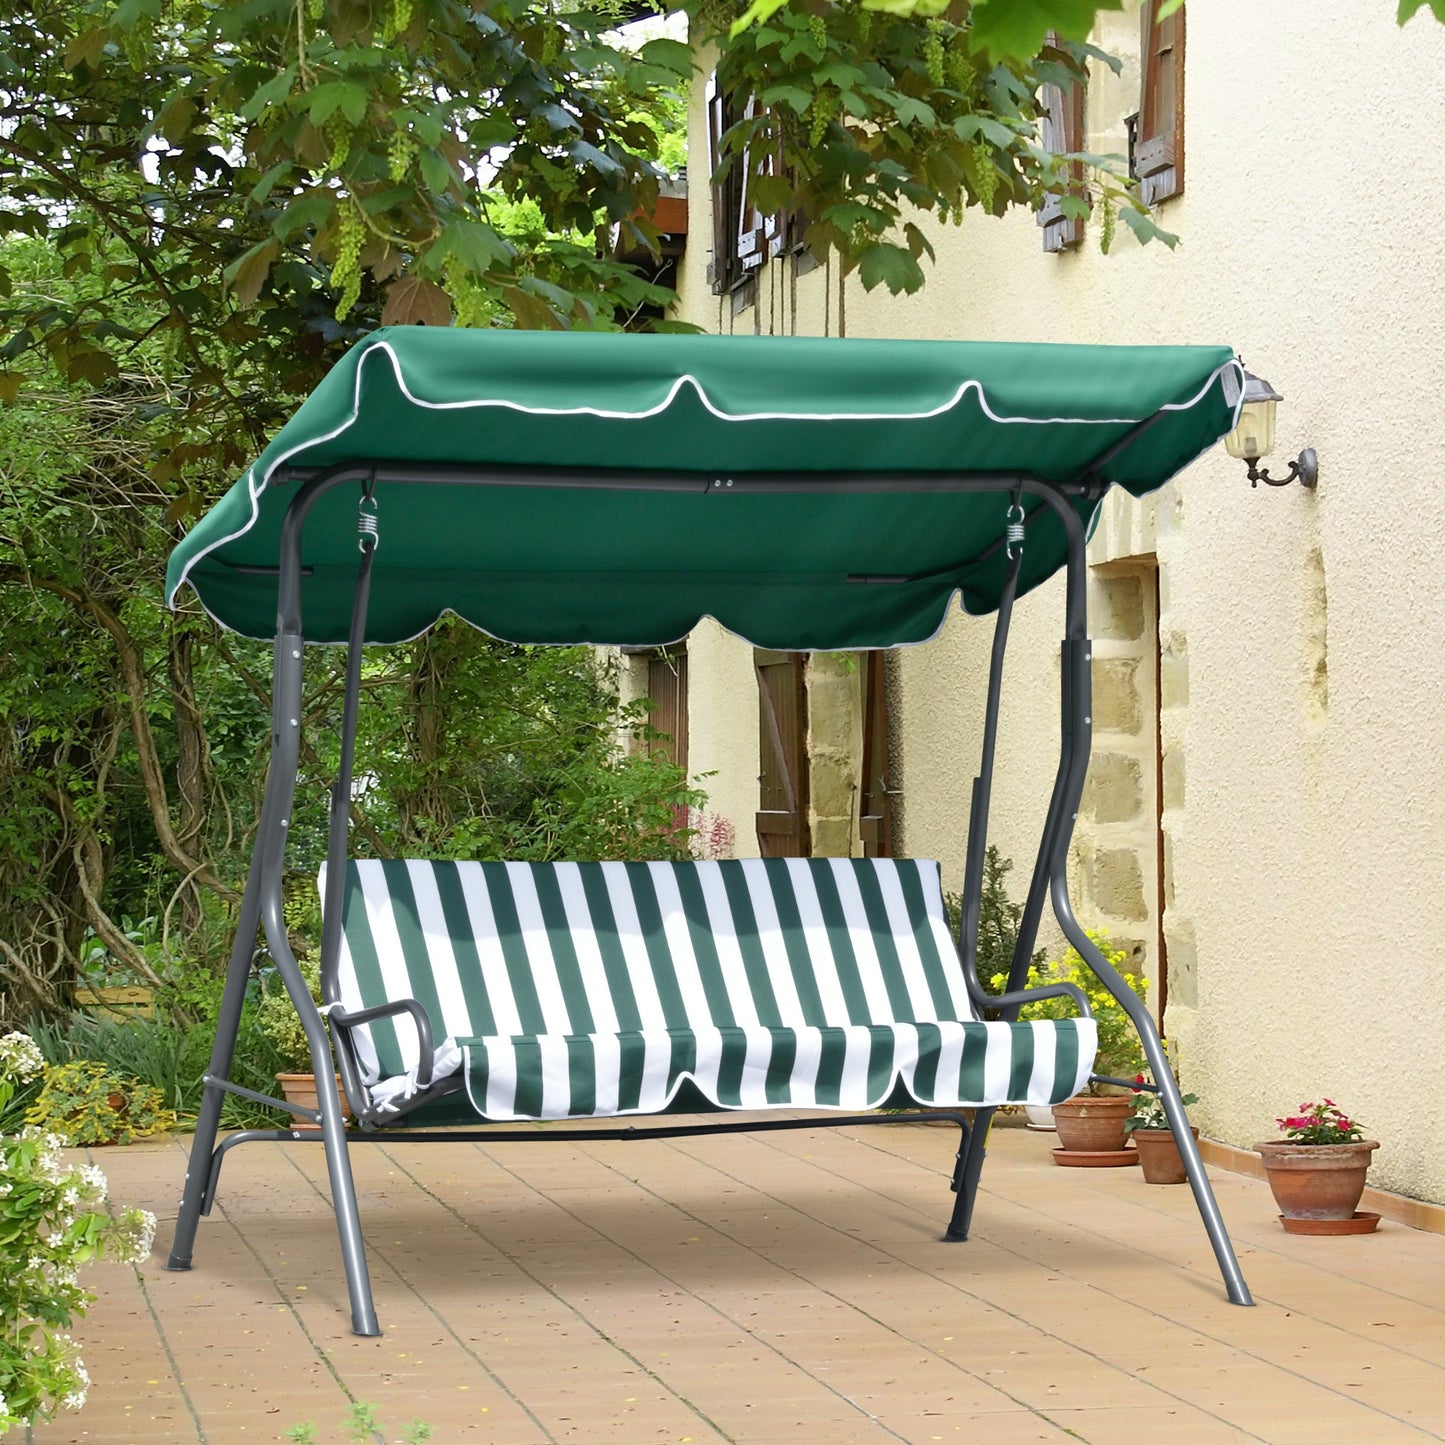 Outdoor and Garden-3-Person Porch Swing with Canopy, Patio Swing Chair, Outdoor Canopy Swing Bench with Adjustable Shade, Cushion and Steel Frame, Green - Outdoor Style Company